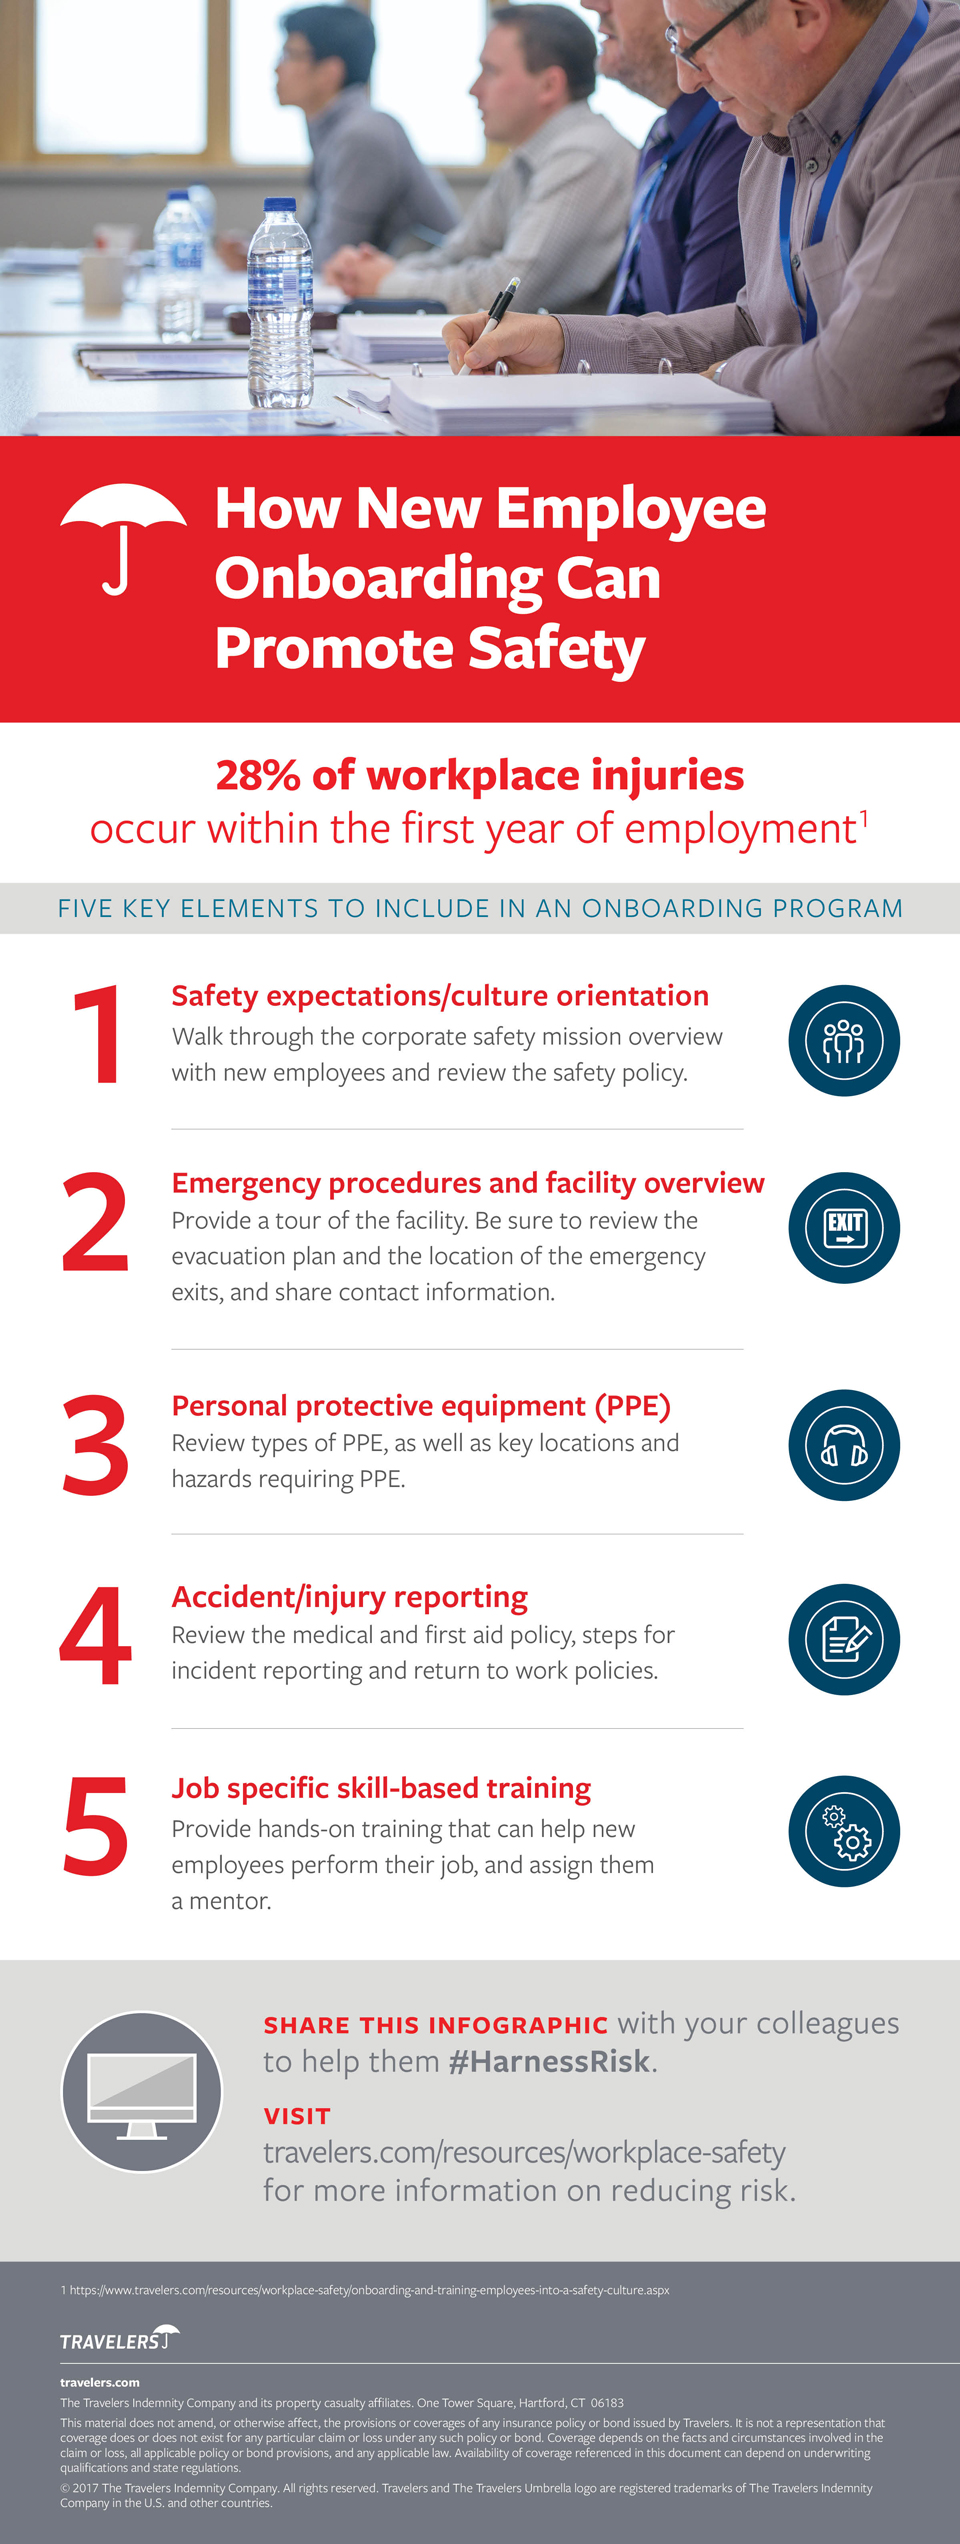 How New Employee Onboarding Can Promote Safety infographic, see details below